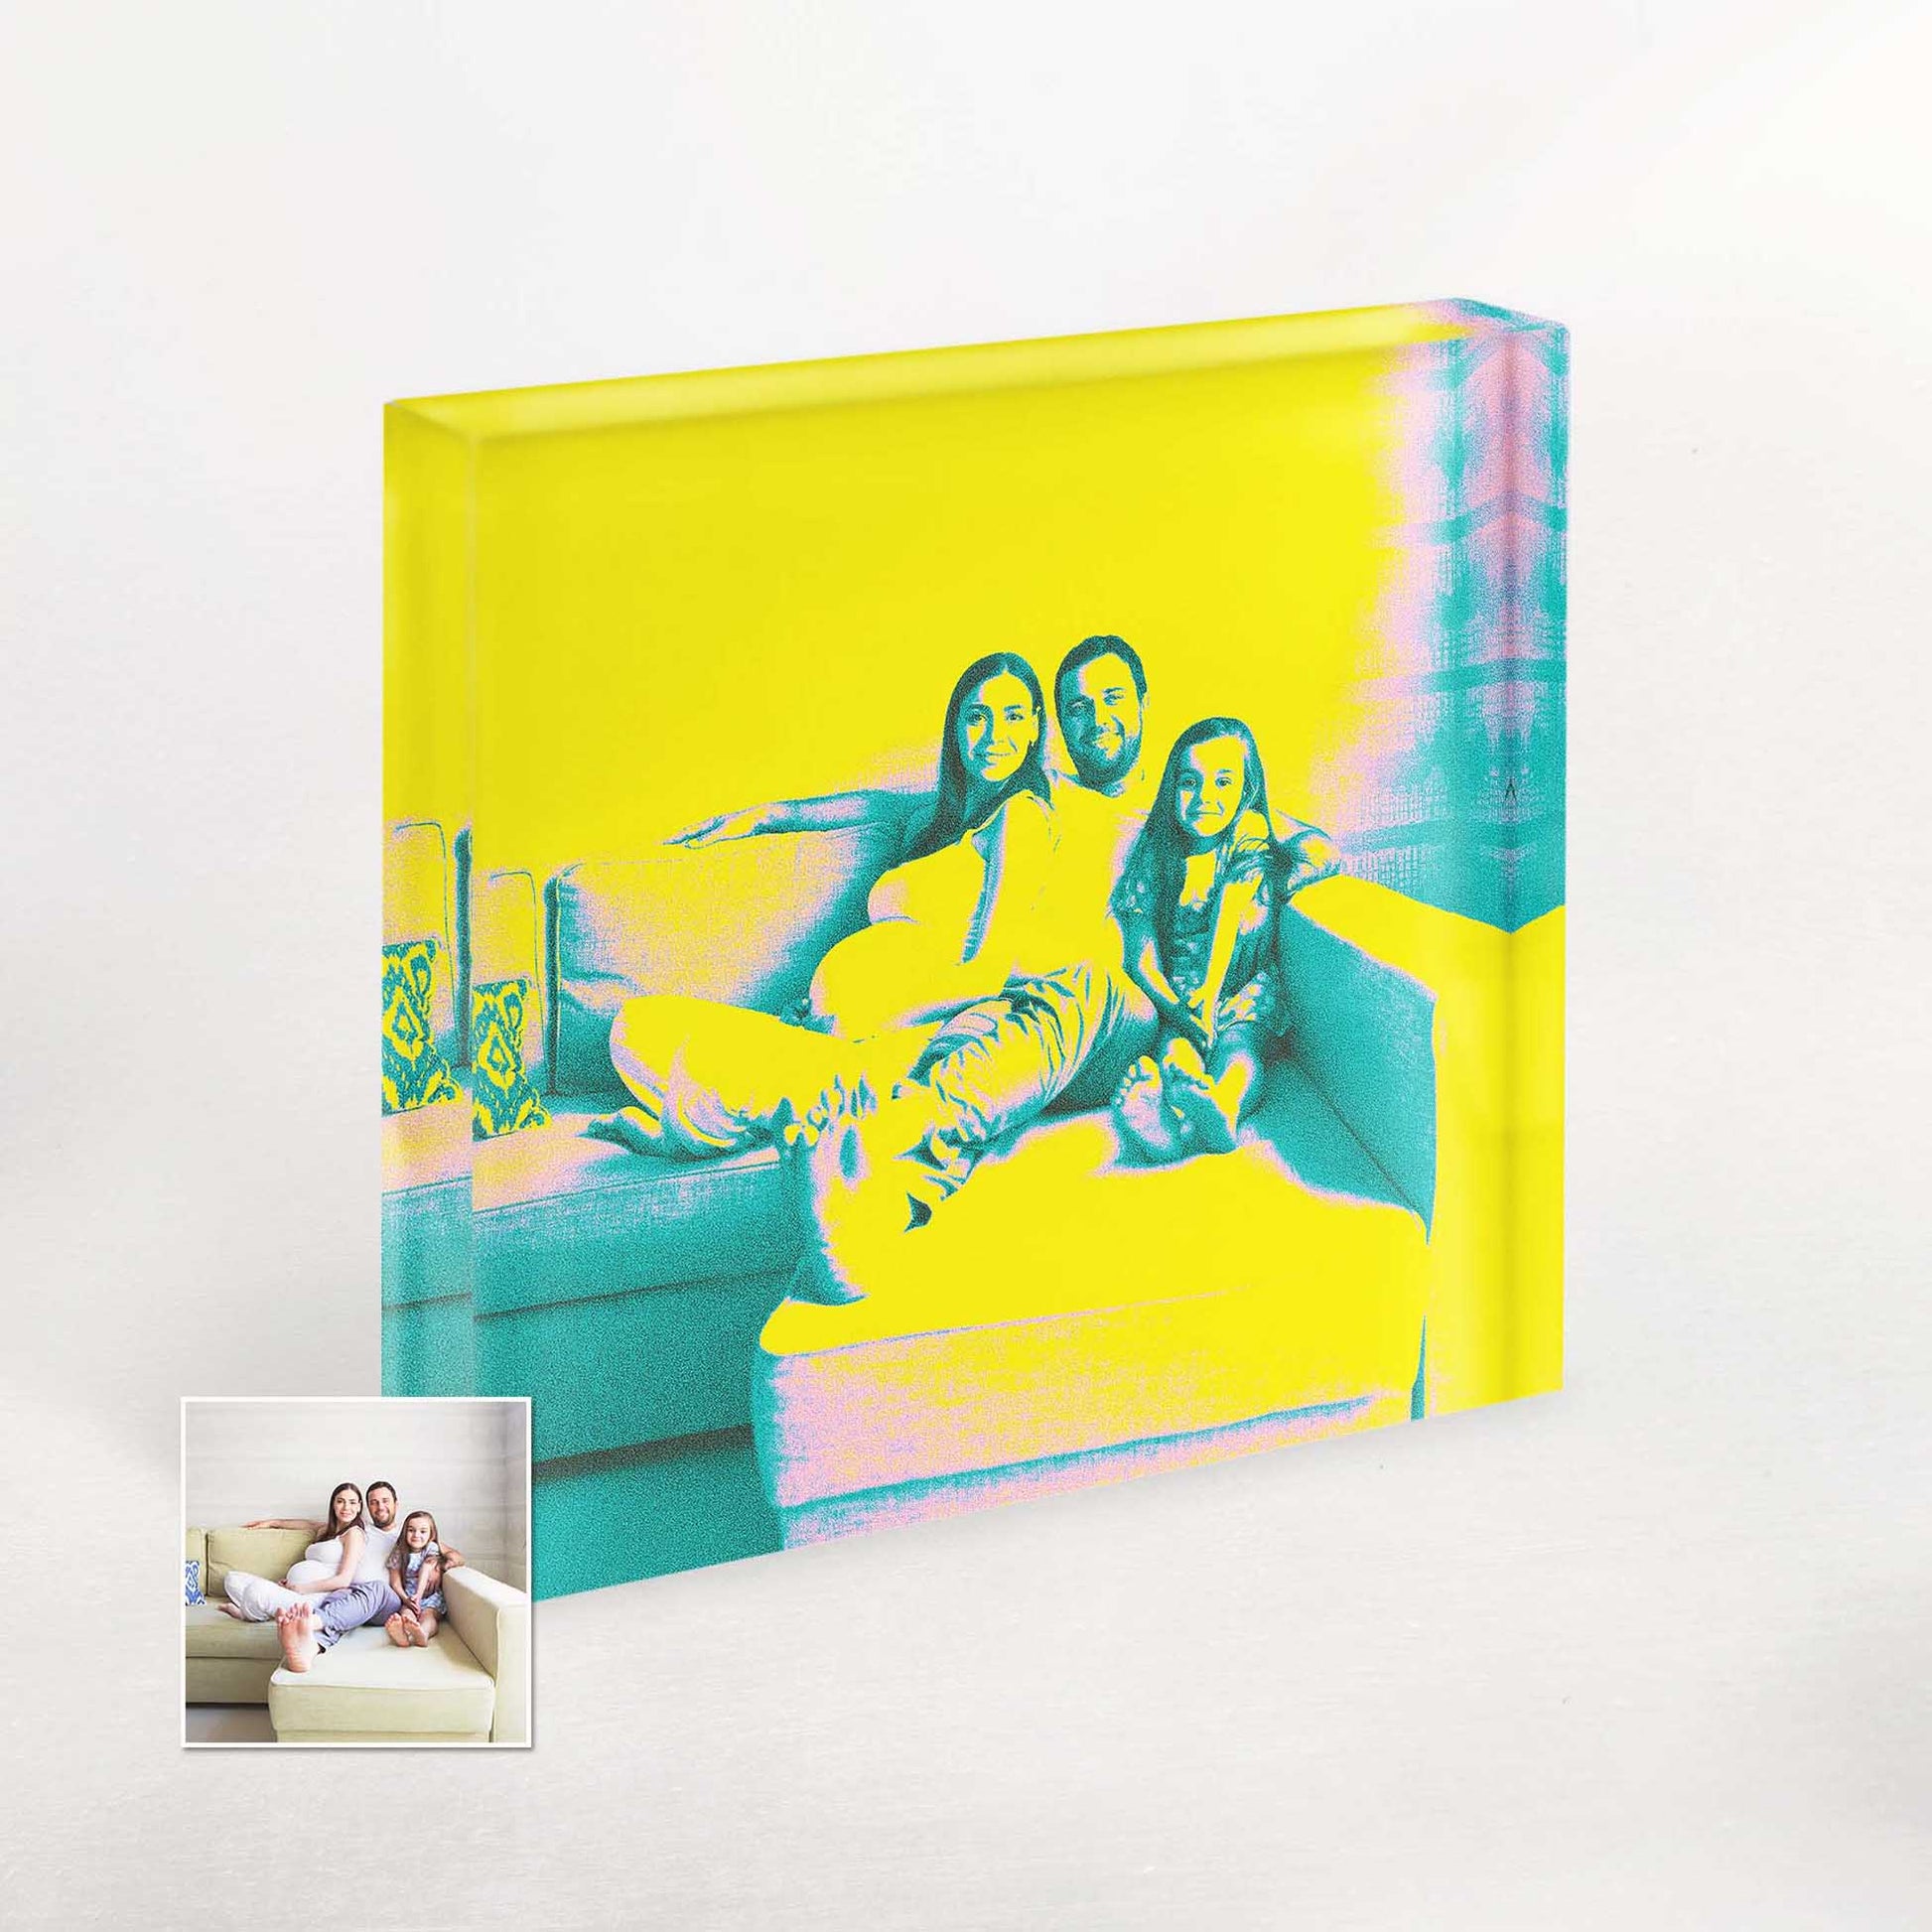 Experience the captivating allure of personalized art with this Acid Yellow Color Effect Acrylic Block Photo. The intense and vivid yellow shade adds a sense of vibrancy and excitement, making it a perfect statement piece for contemporary spaces